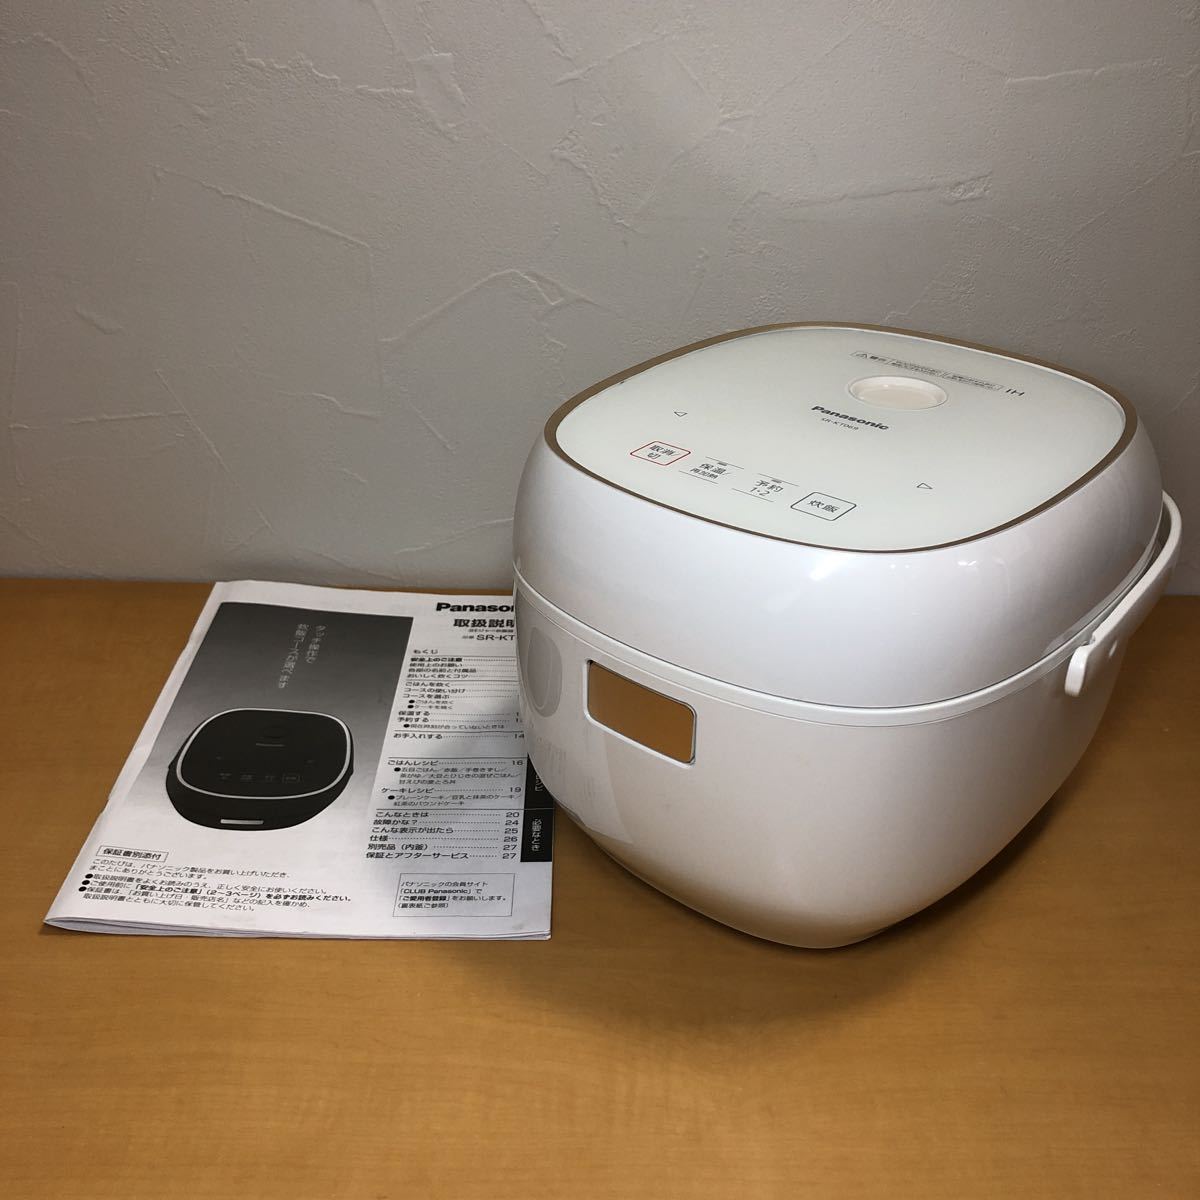 Panasonic パナソニック 炊飯器 3.5合 IH式 備長炭釜 ホワイト SR-KT069-W 現状品 product details |  Yahoo! Auctions Japan proxy bidding and shopping service | FROM JAPAN